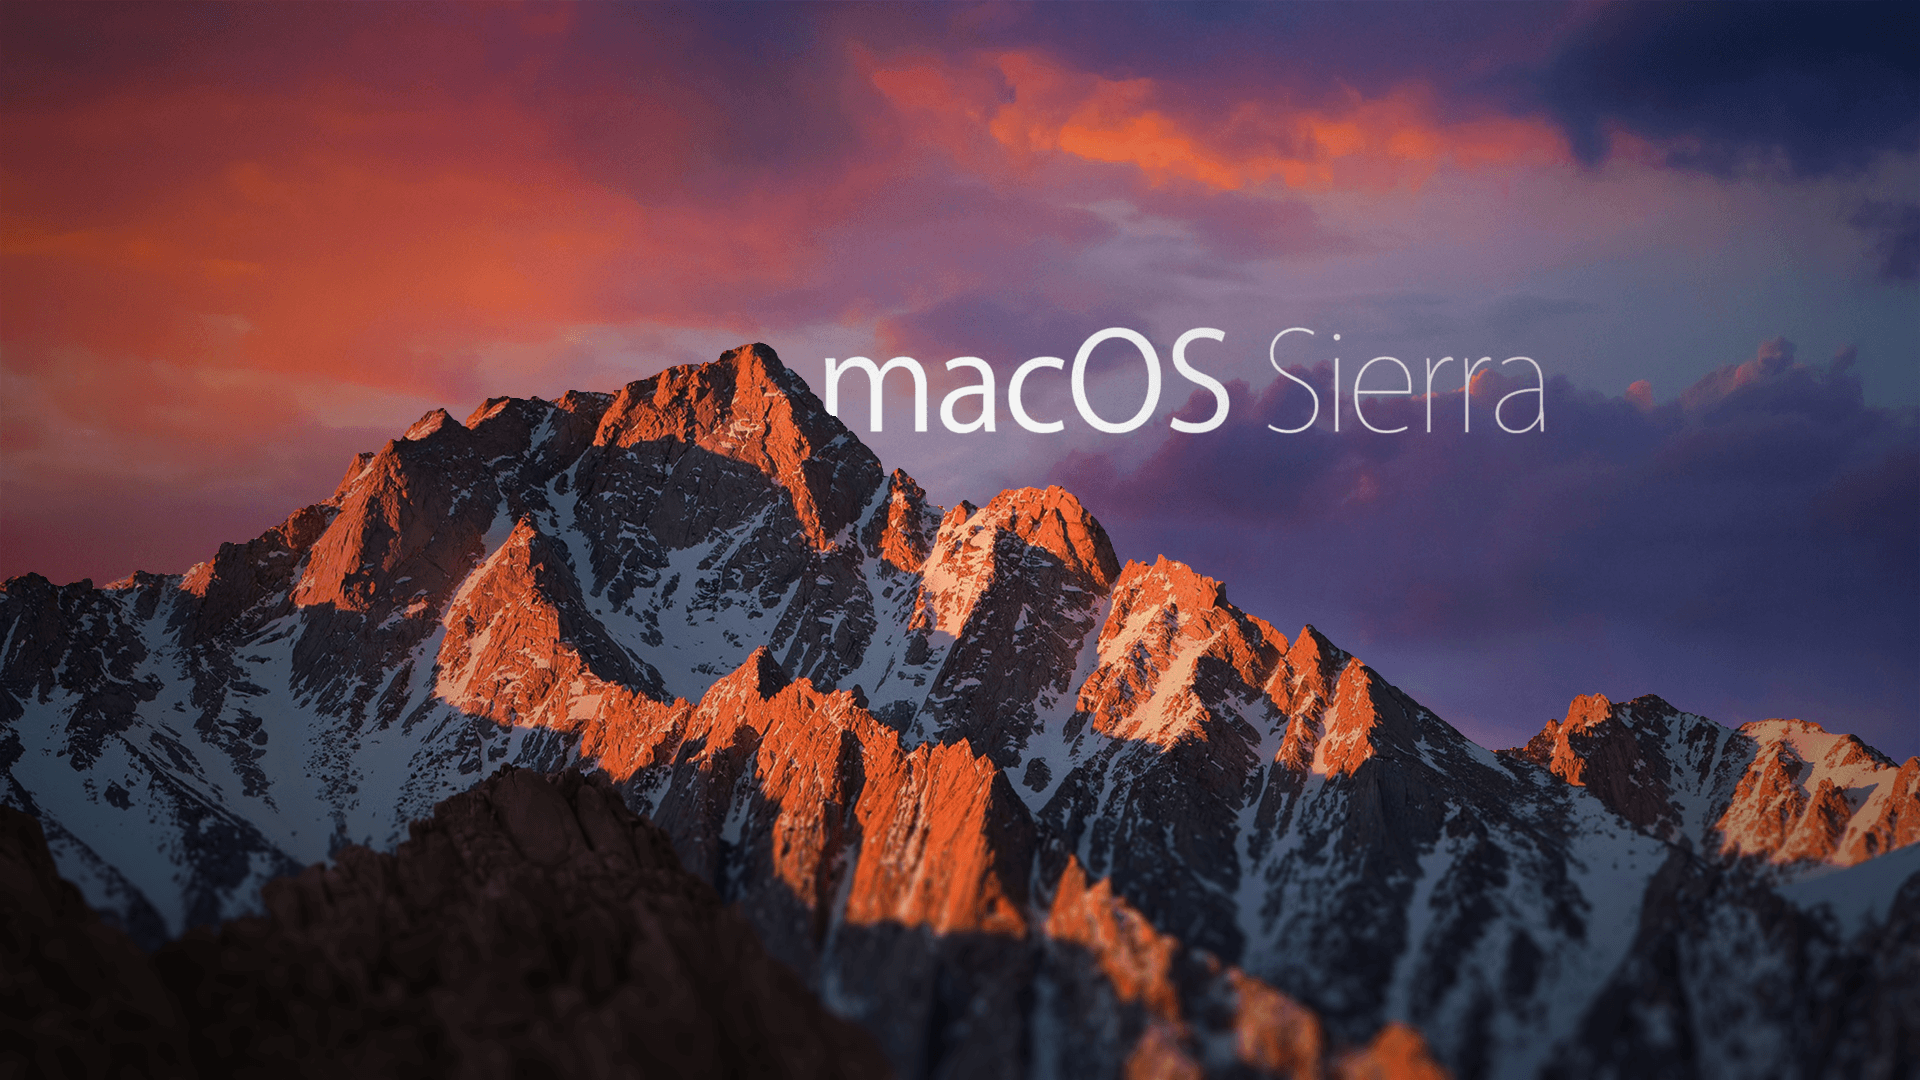 hd wallpapers for mac 1920x1080